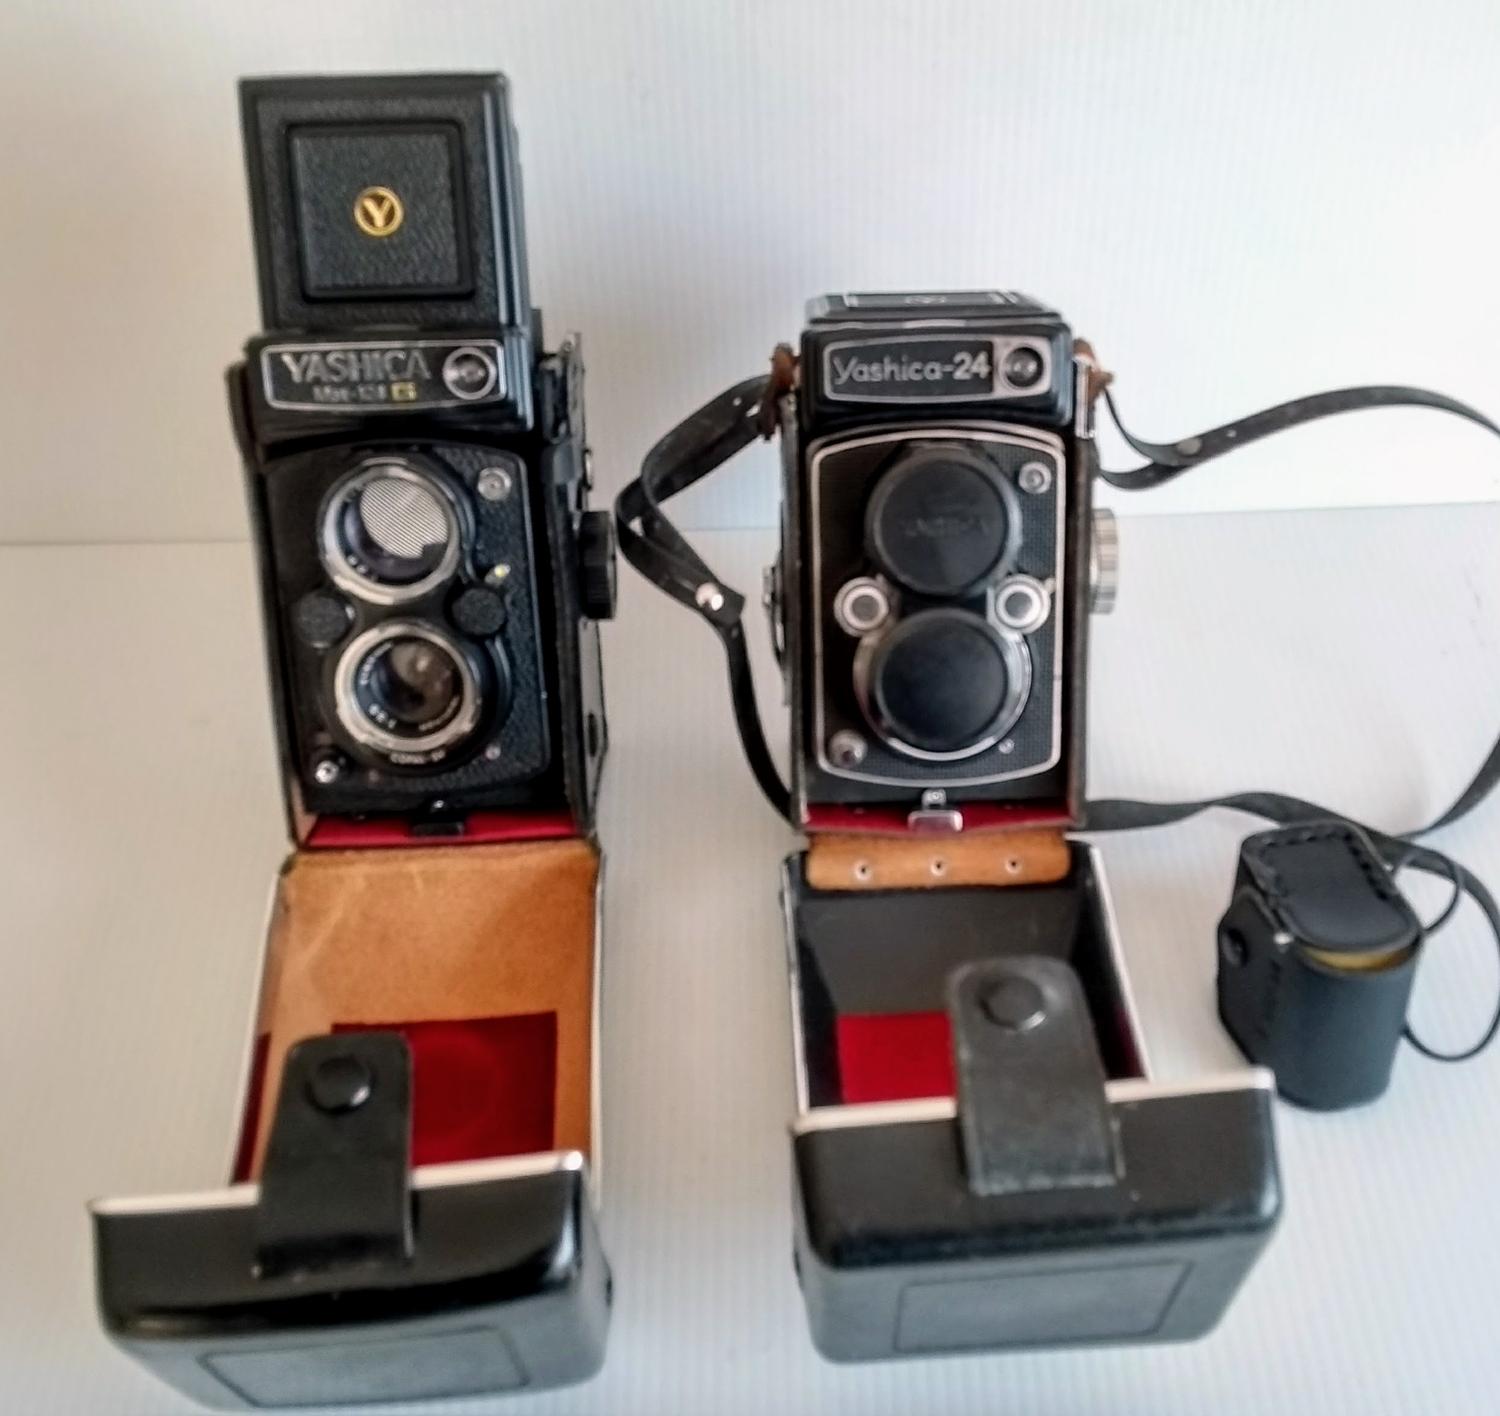 A Yashica Mat 124G and Yashica 24 TLR cameras in original cases (2)